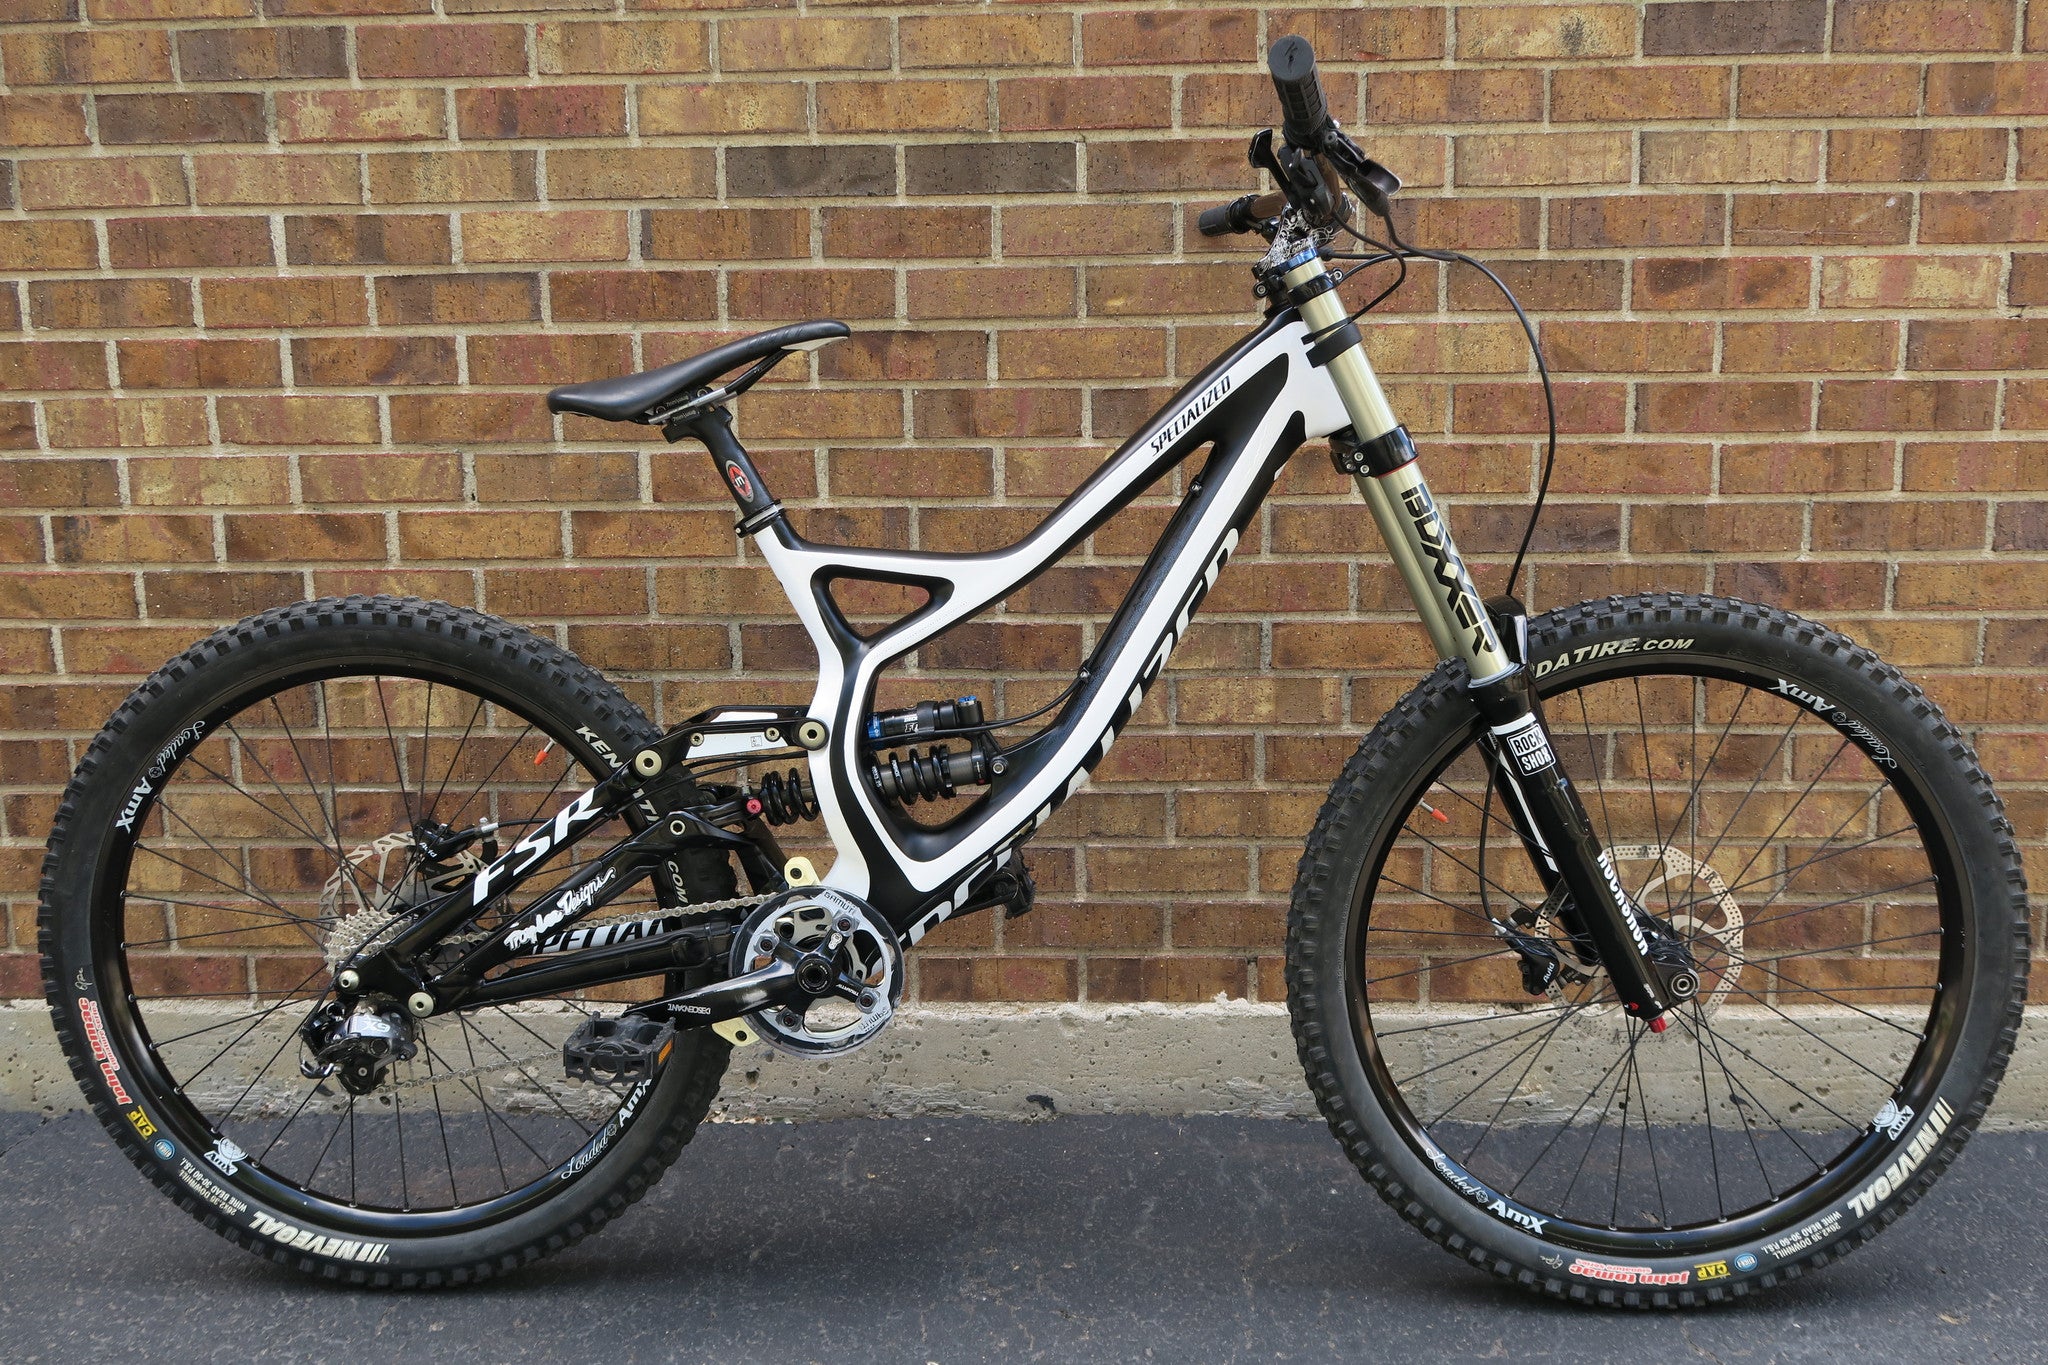 2013 SPECIALIZED DEMO 8 1 CARBON